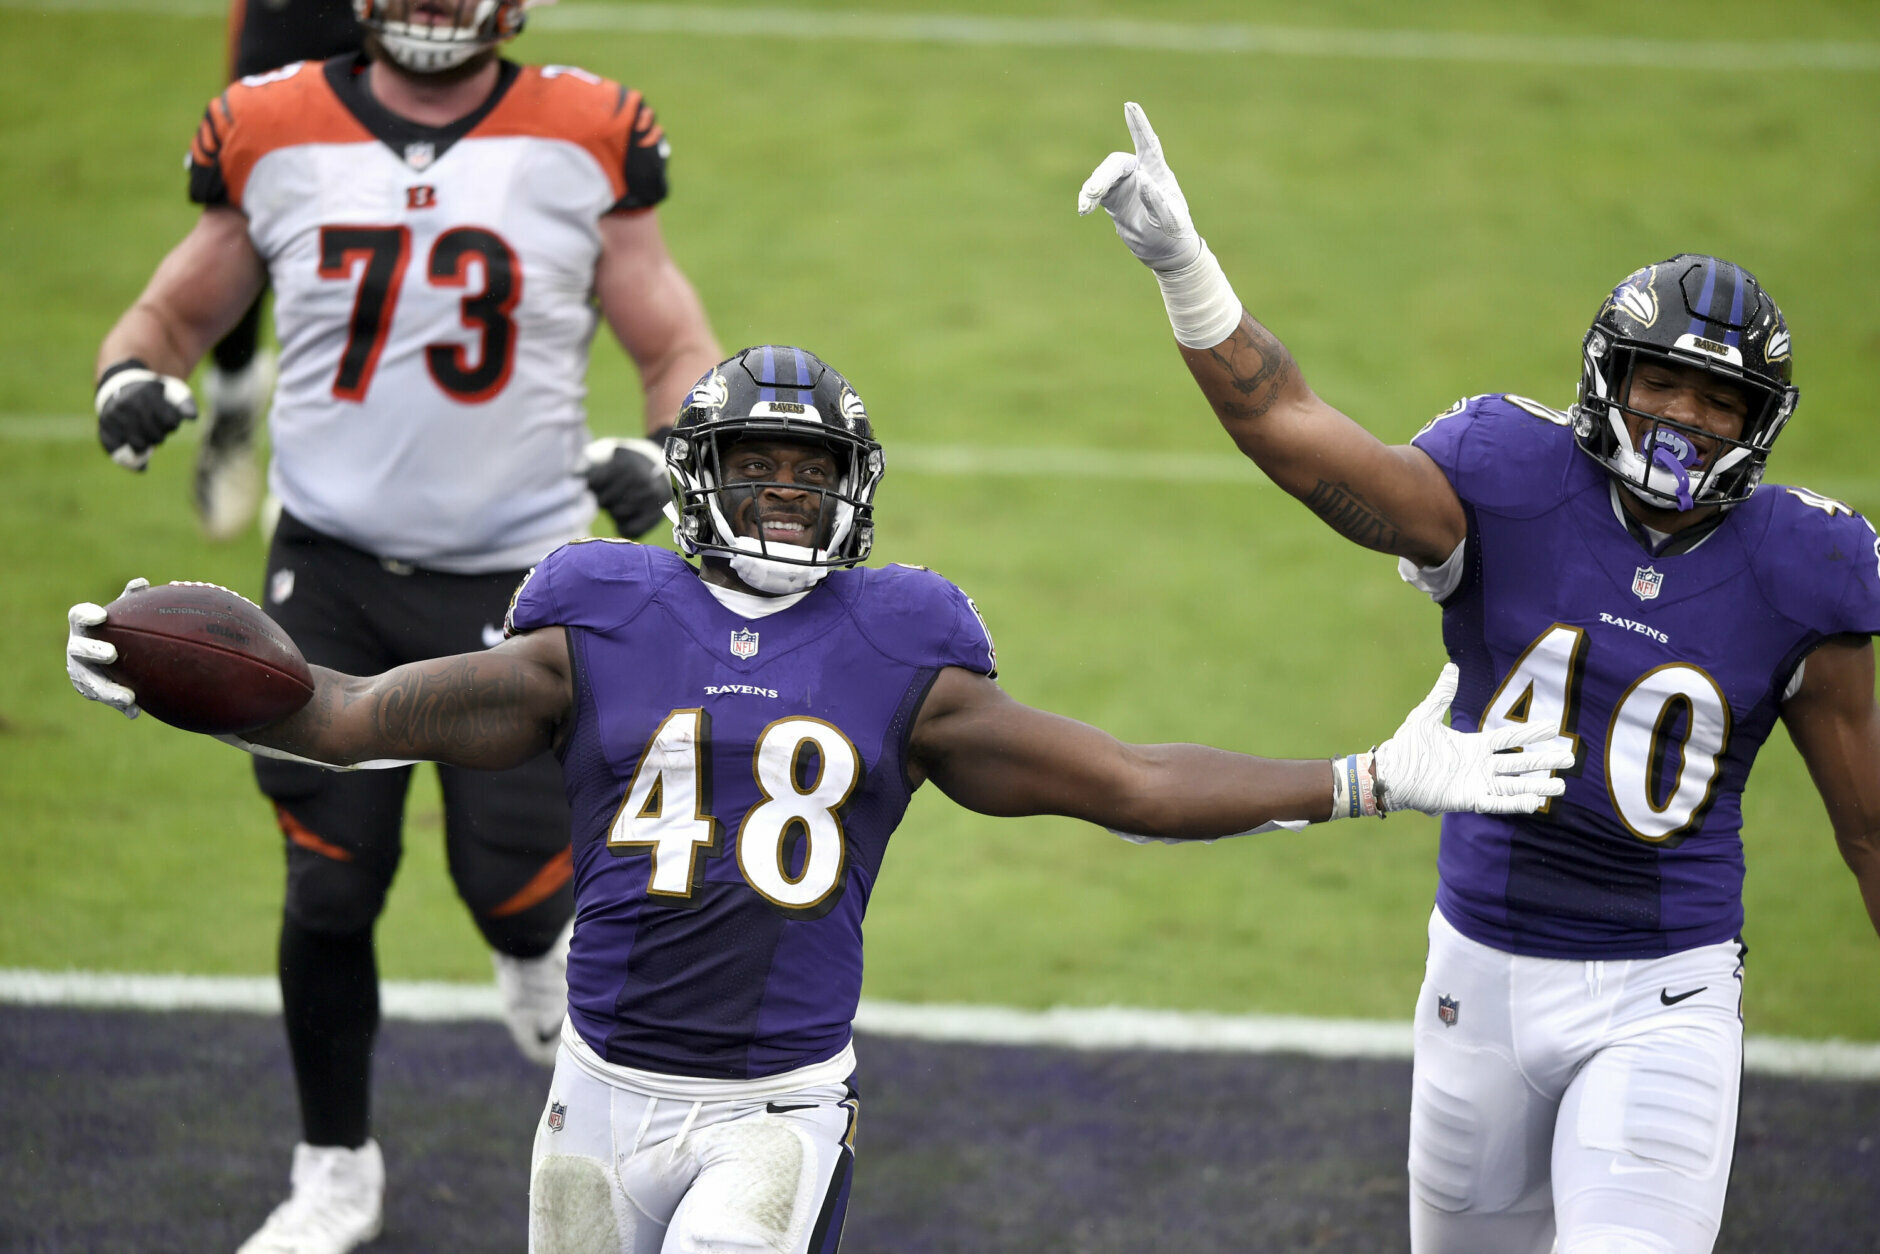 <p><b><i>Bengals 3</i></b><br />
<b><i>Ravens 27</i></b></p>
<p>Though the focus was on <a href="https://twitter.com/ESPNStatsInfo/status/1315321261183164416?s=20">the historic meeting between young QBs</a>, Baltimore&#8217;s defense finally realized its potential with seven sacks of Joe Burrow and extended their streak to 18 straight games with a takeaway. The Ravens D will need more games like this to repeat as champions of the suddenly-competitive AFC North.</p>
